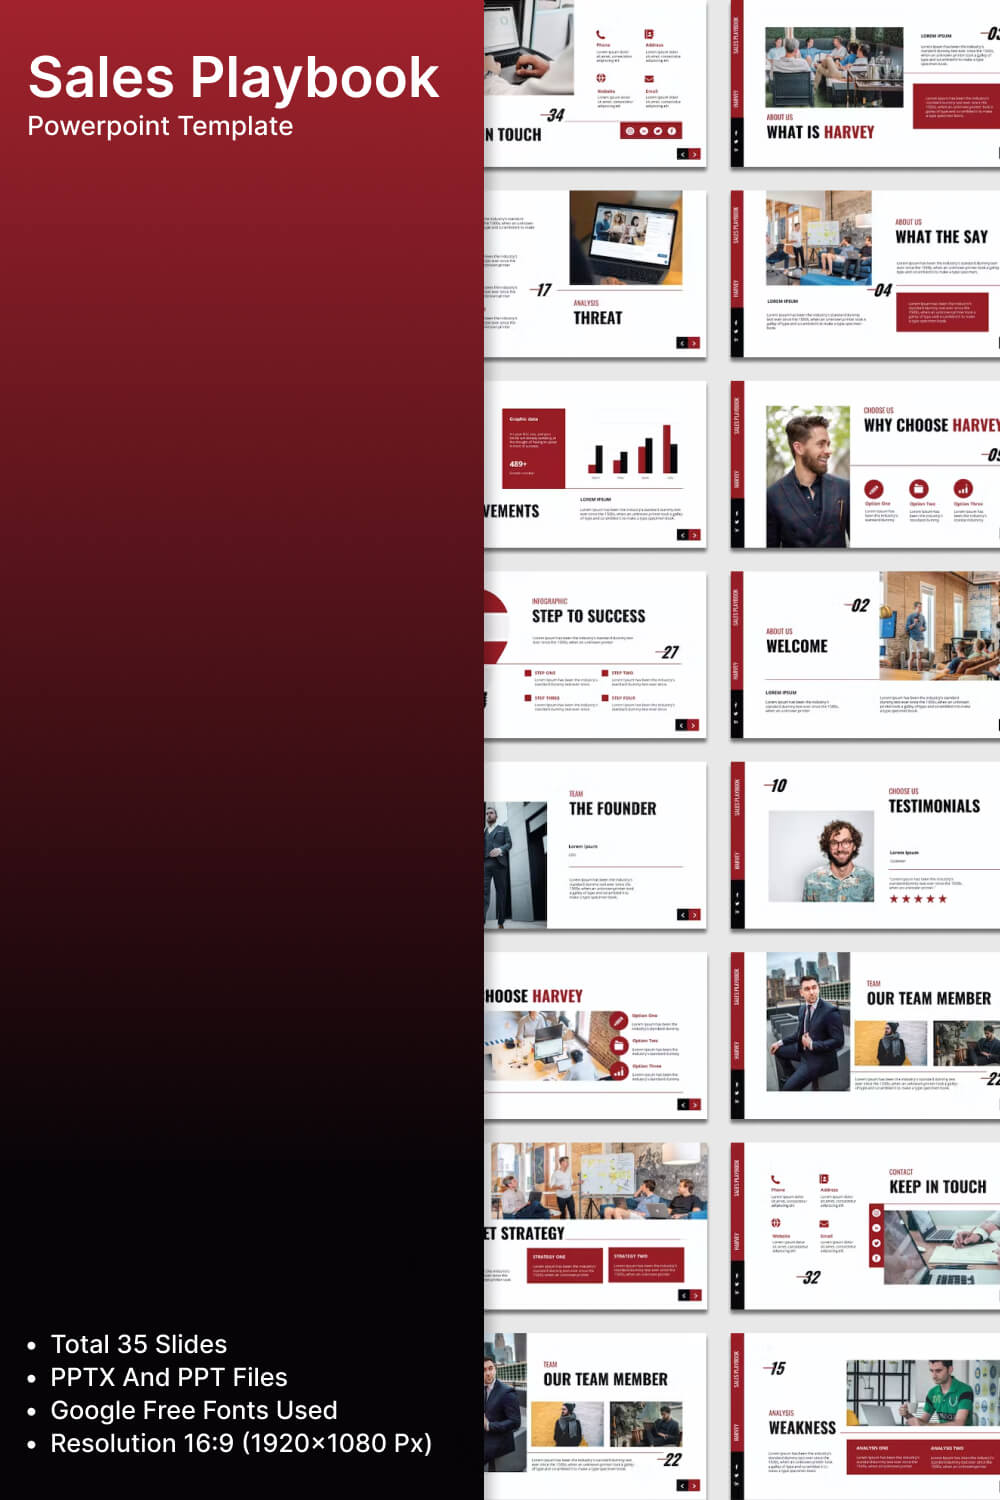 Total 35 slides of Sales Playbook Powerpoint Template.